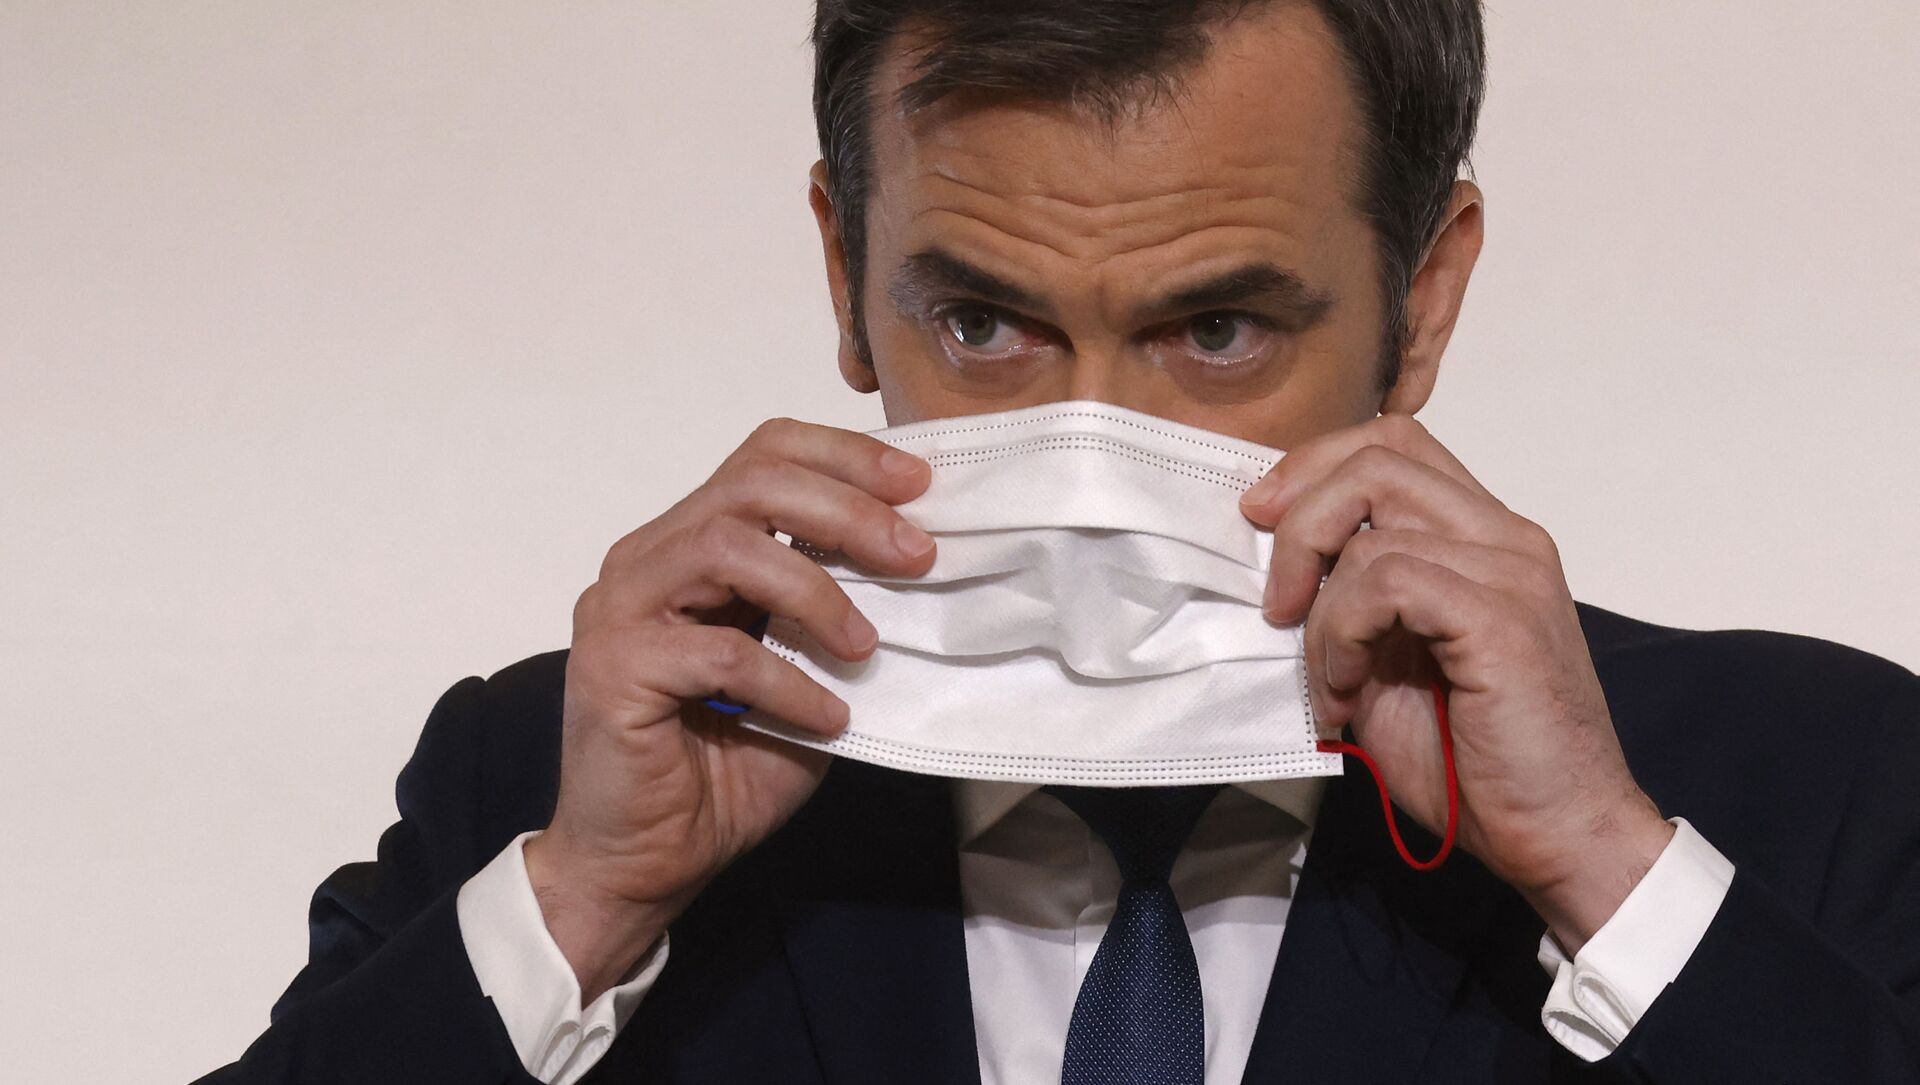 French Health Minister Olivier Veran puts on his protective face mask following a press conference on the current French government strategy for the ongoing Covid-19 pandemic in Paris, on April 22, 2021. - The peak of the third wave of the Covid-19 pandemic in France appears to be behind us, Prime Minister Jean Castex said on April 22, 2021, while travel restrictions will be relaxed from early next month. (Photo by Ludovic MARIN / POOL / AFP) - Sputnik Afrique, 1920, 09.07.2021